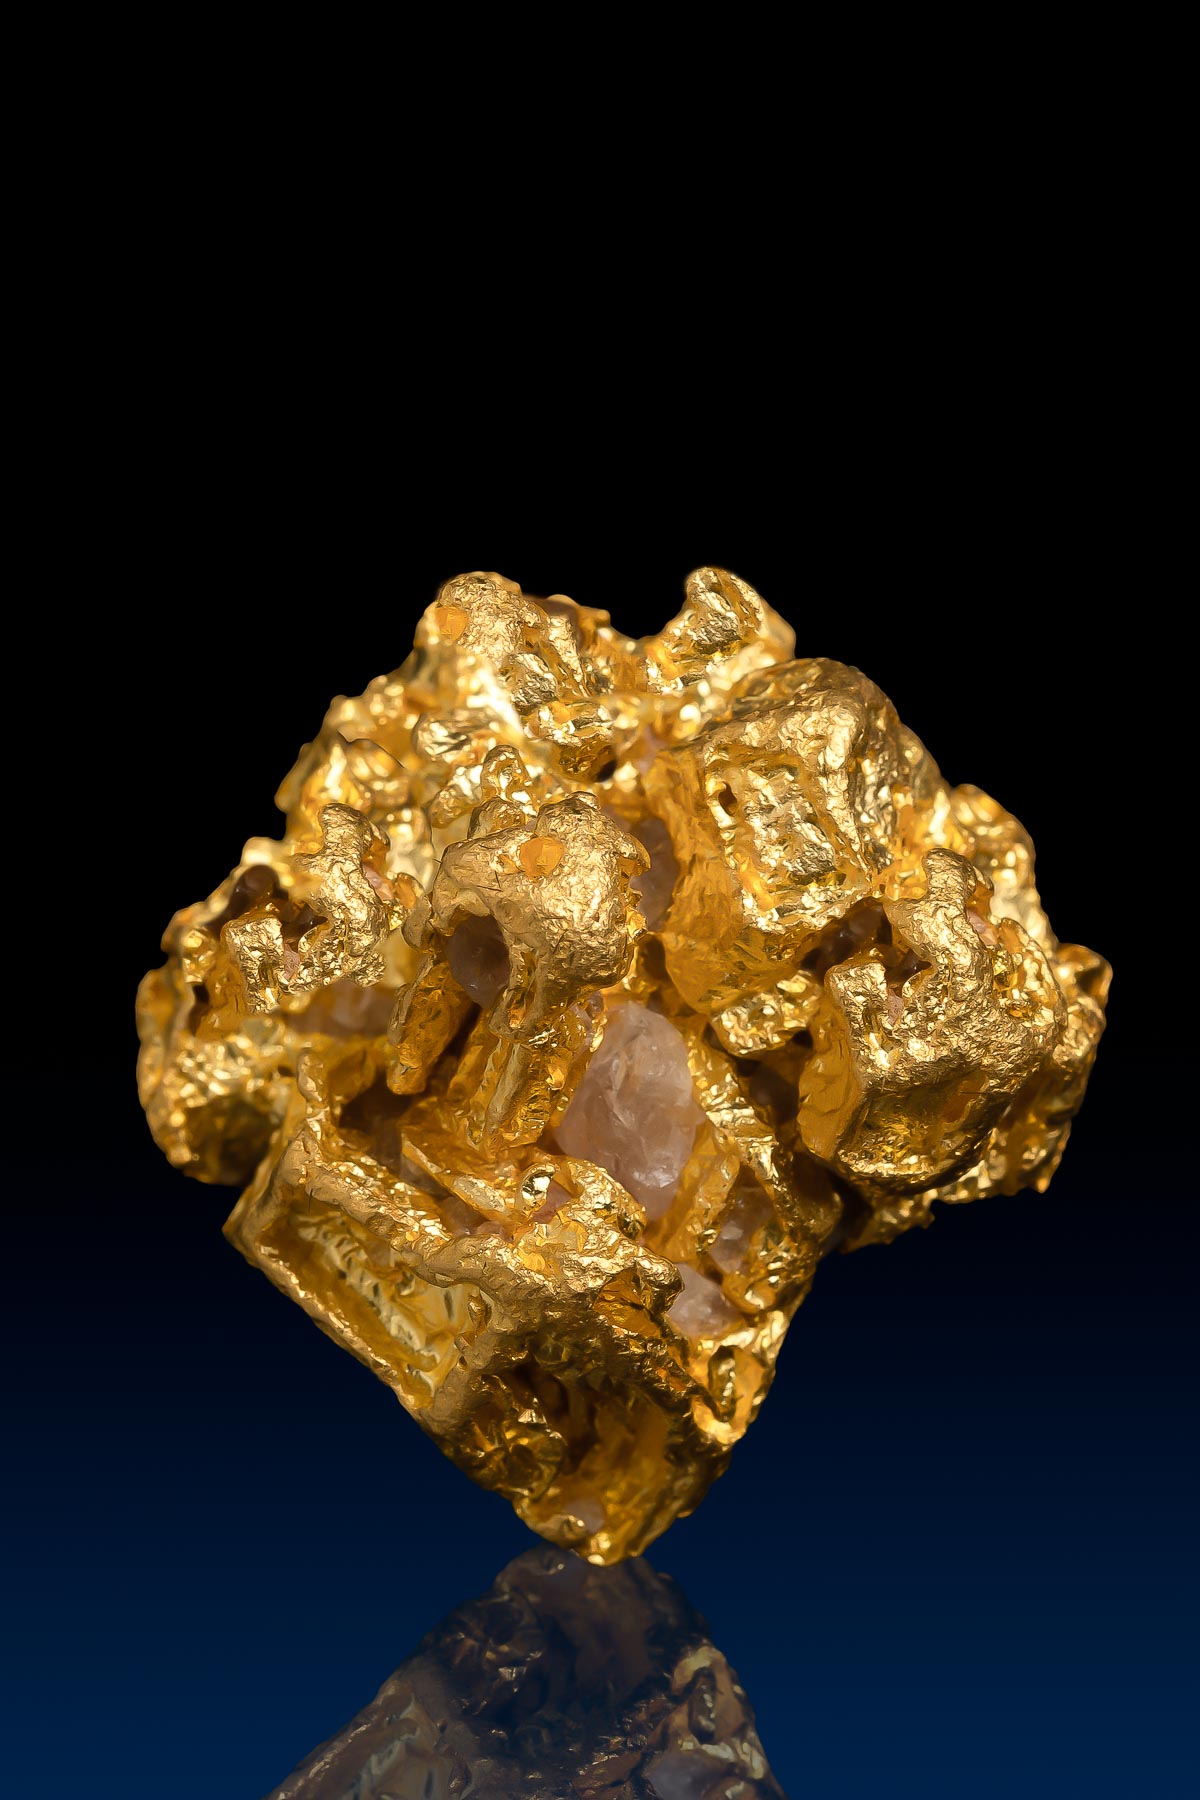 Large and Intricate Gold Nugget Crystal from Alta Floresta, BR